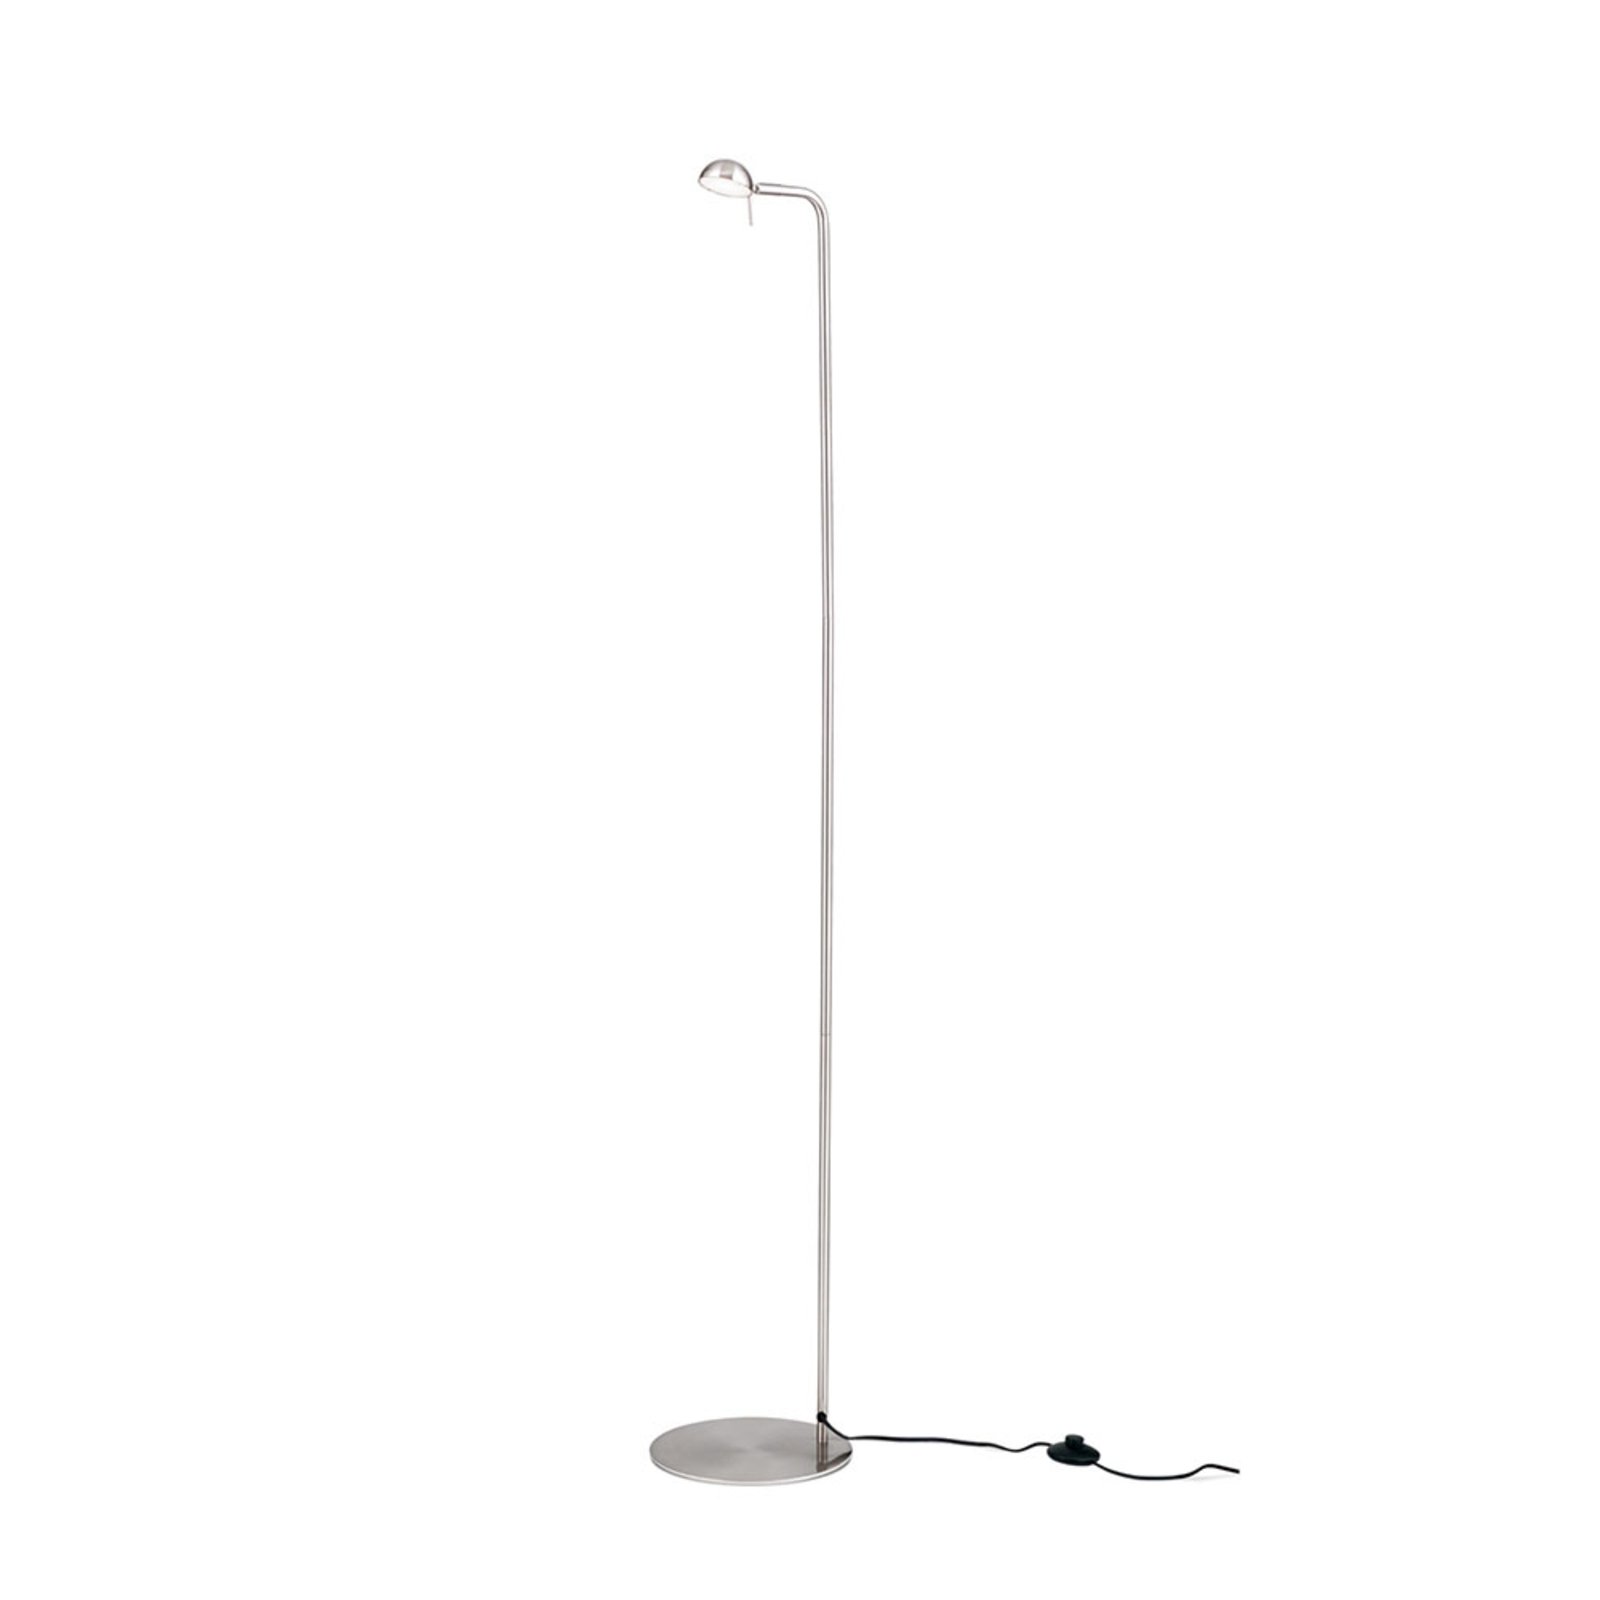 Student LED floor lamp with a pivotable head